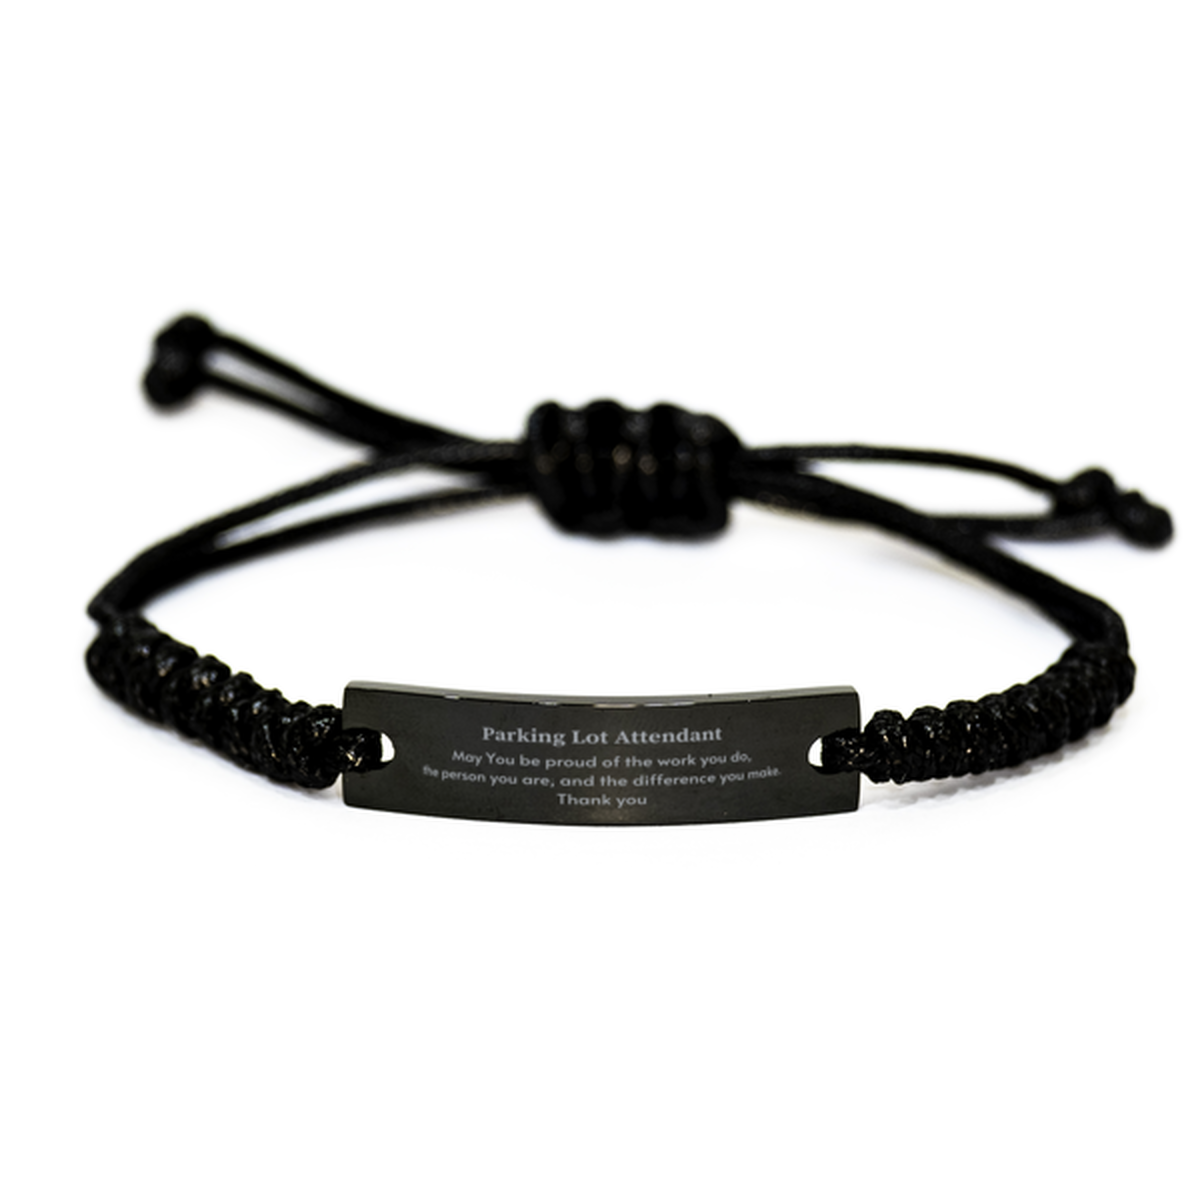 Heartwarming Black Rope Bracelet Retirement Coworkers Gifts for Parking Lot Attendant, Parking Lot Attendant May You be proud of the work you do, the person you are Gifts for Boss Men Women Friends